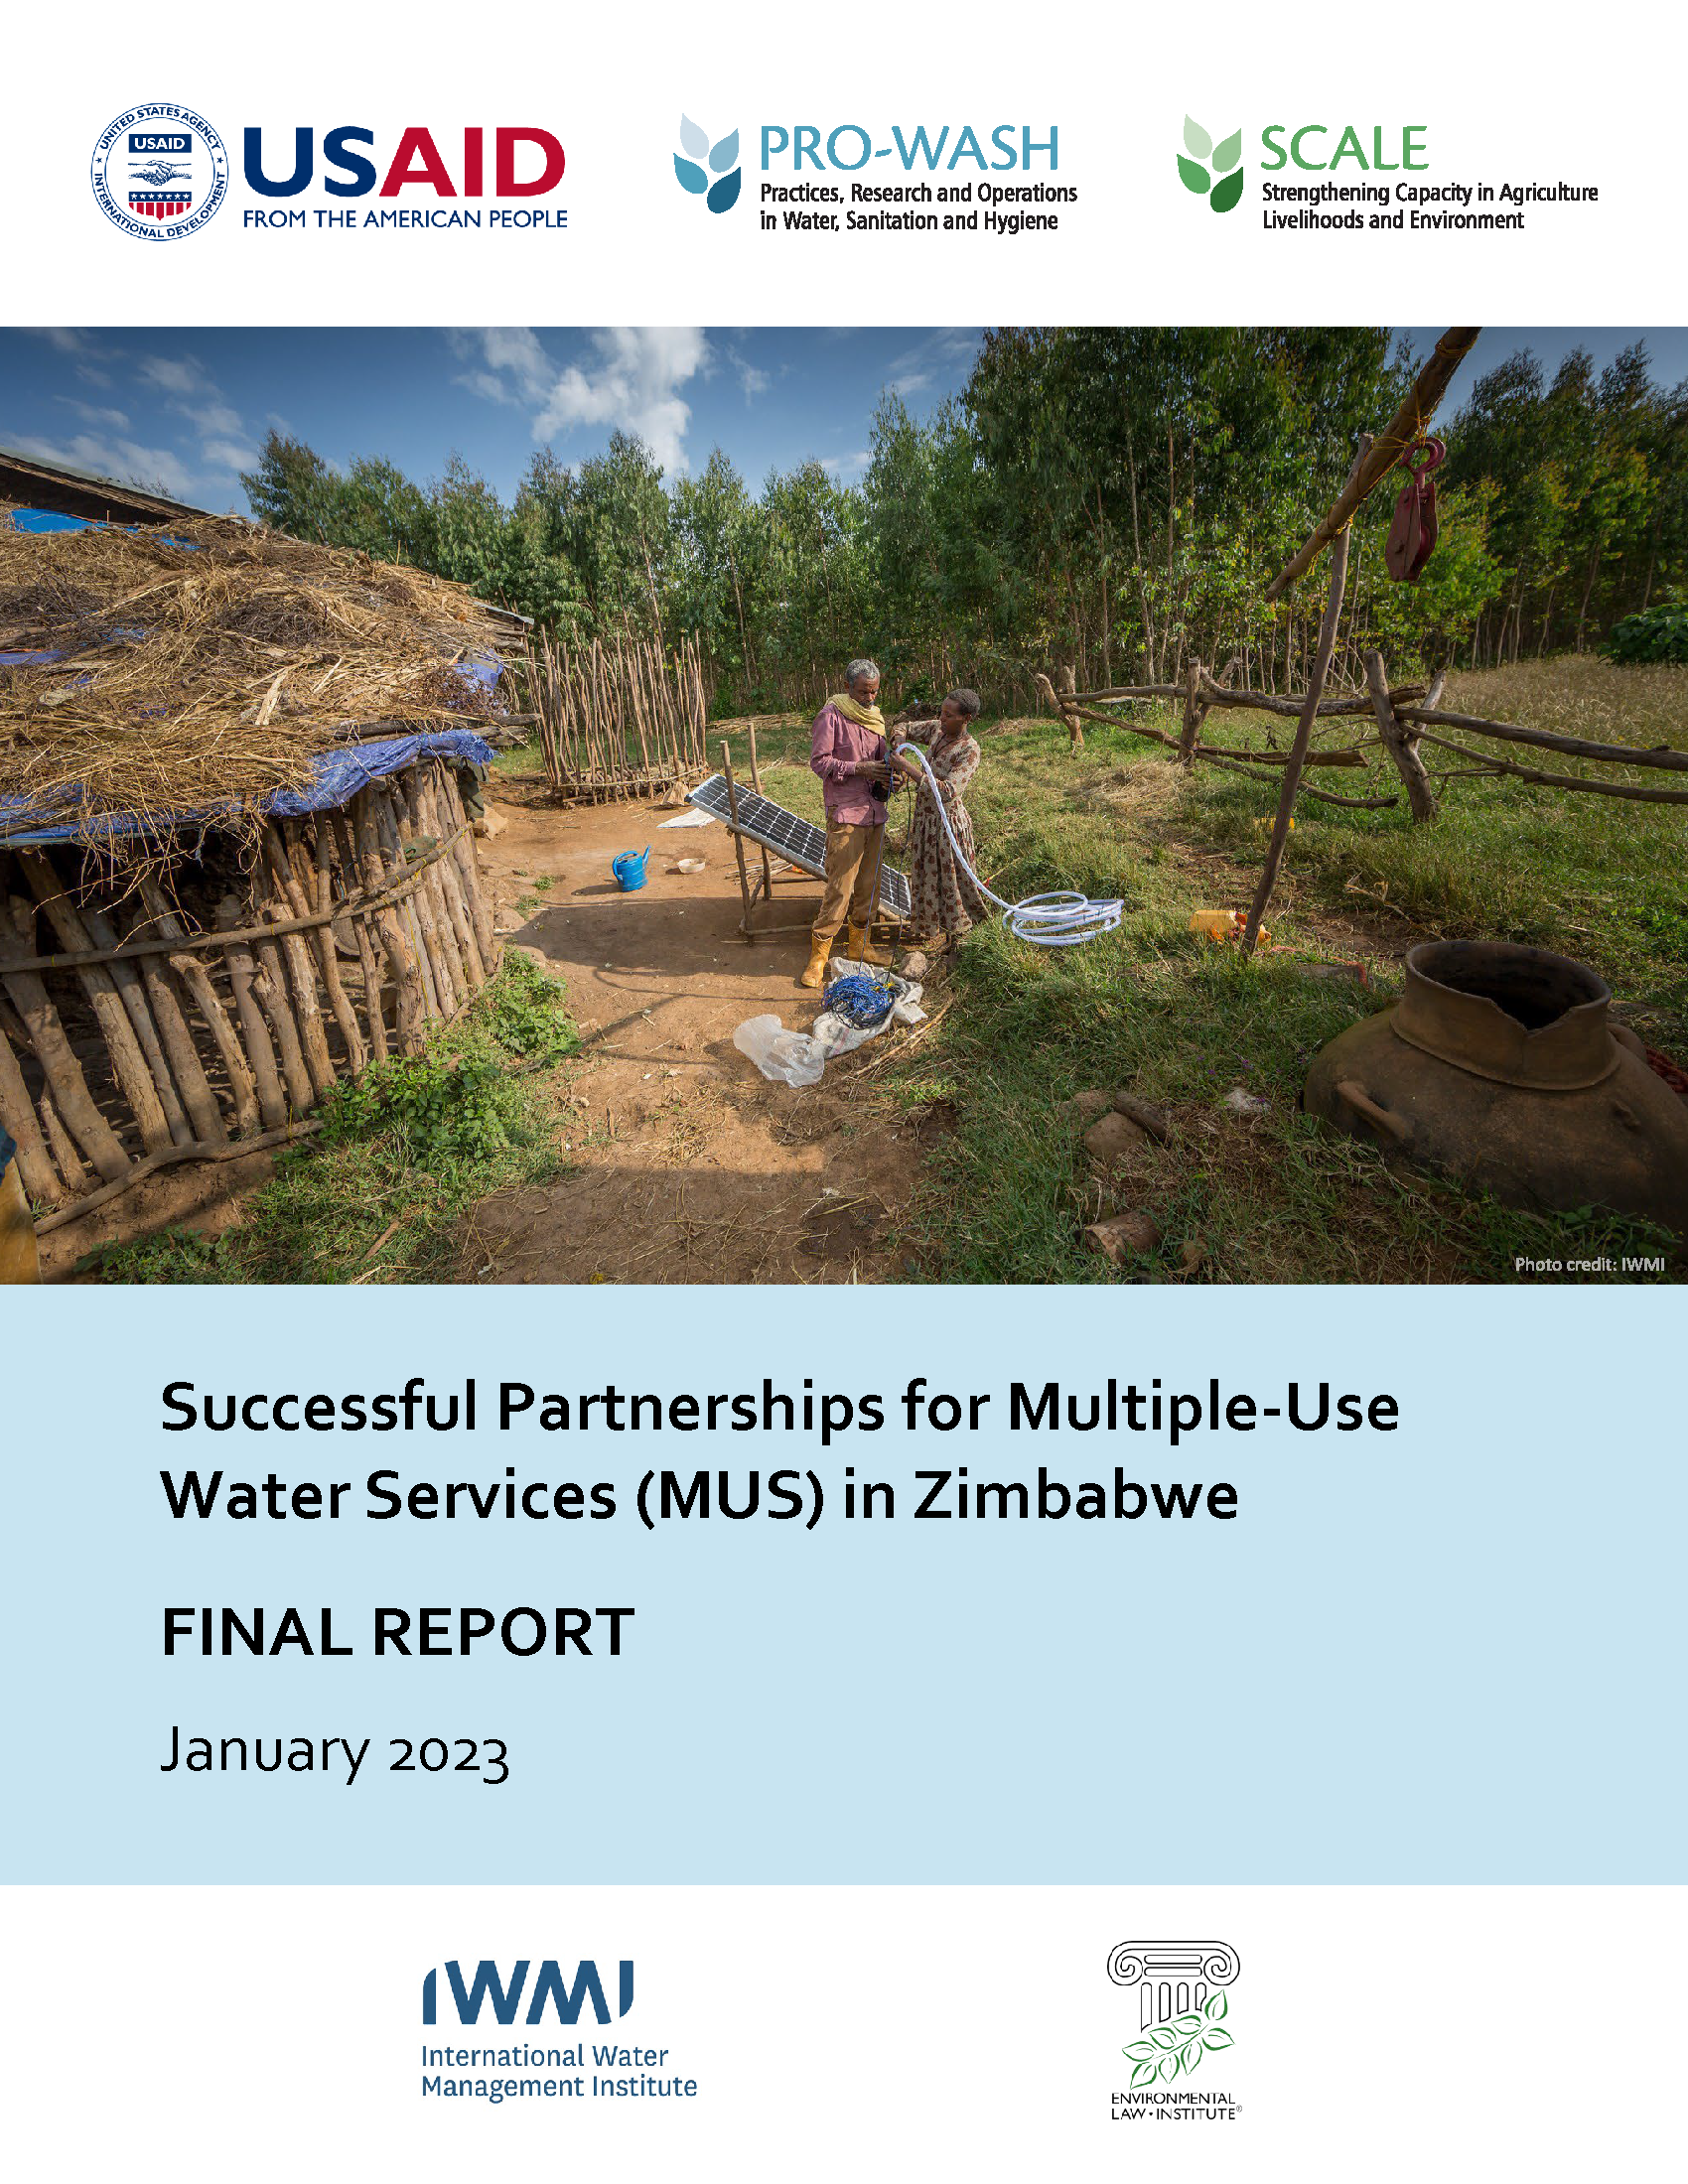 Cover page for Successful Partnerships for Multiple-Use Water Services (MUS) in Zimbabwe: Final Report